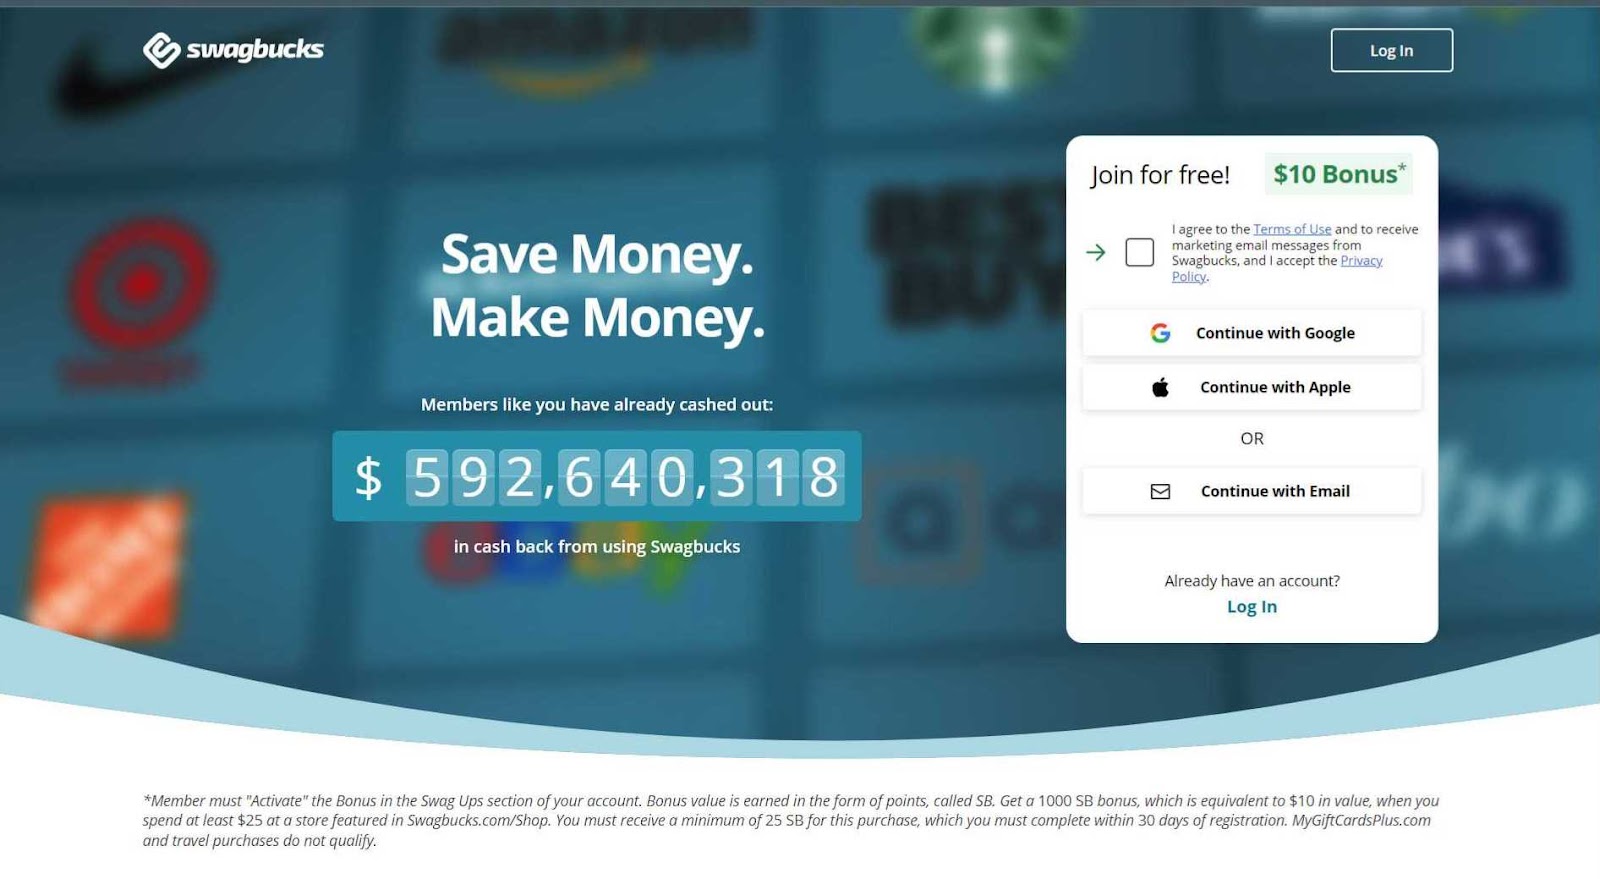 The Swagbucks website indicating that users have cashed out nearly $6 million in total. 